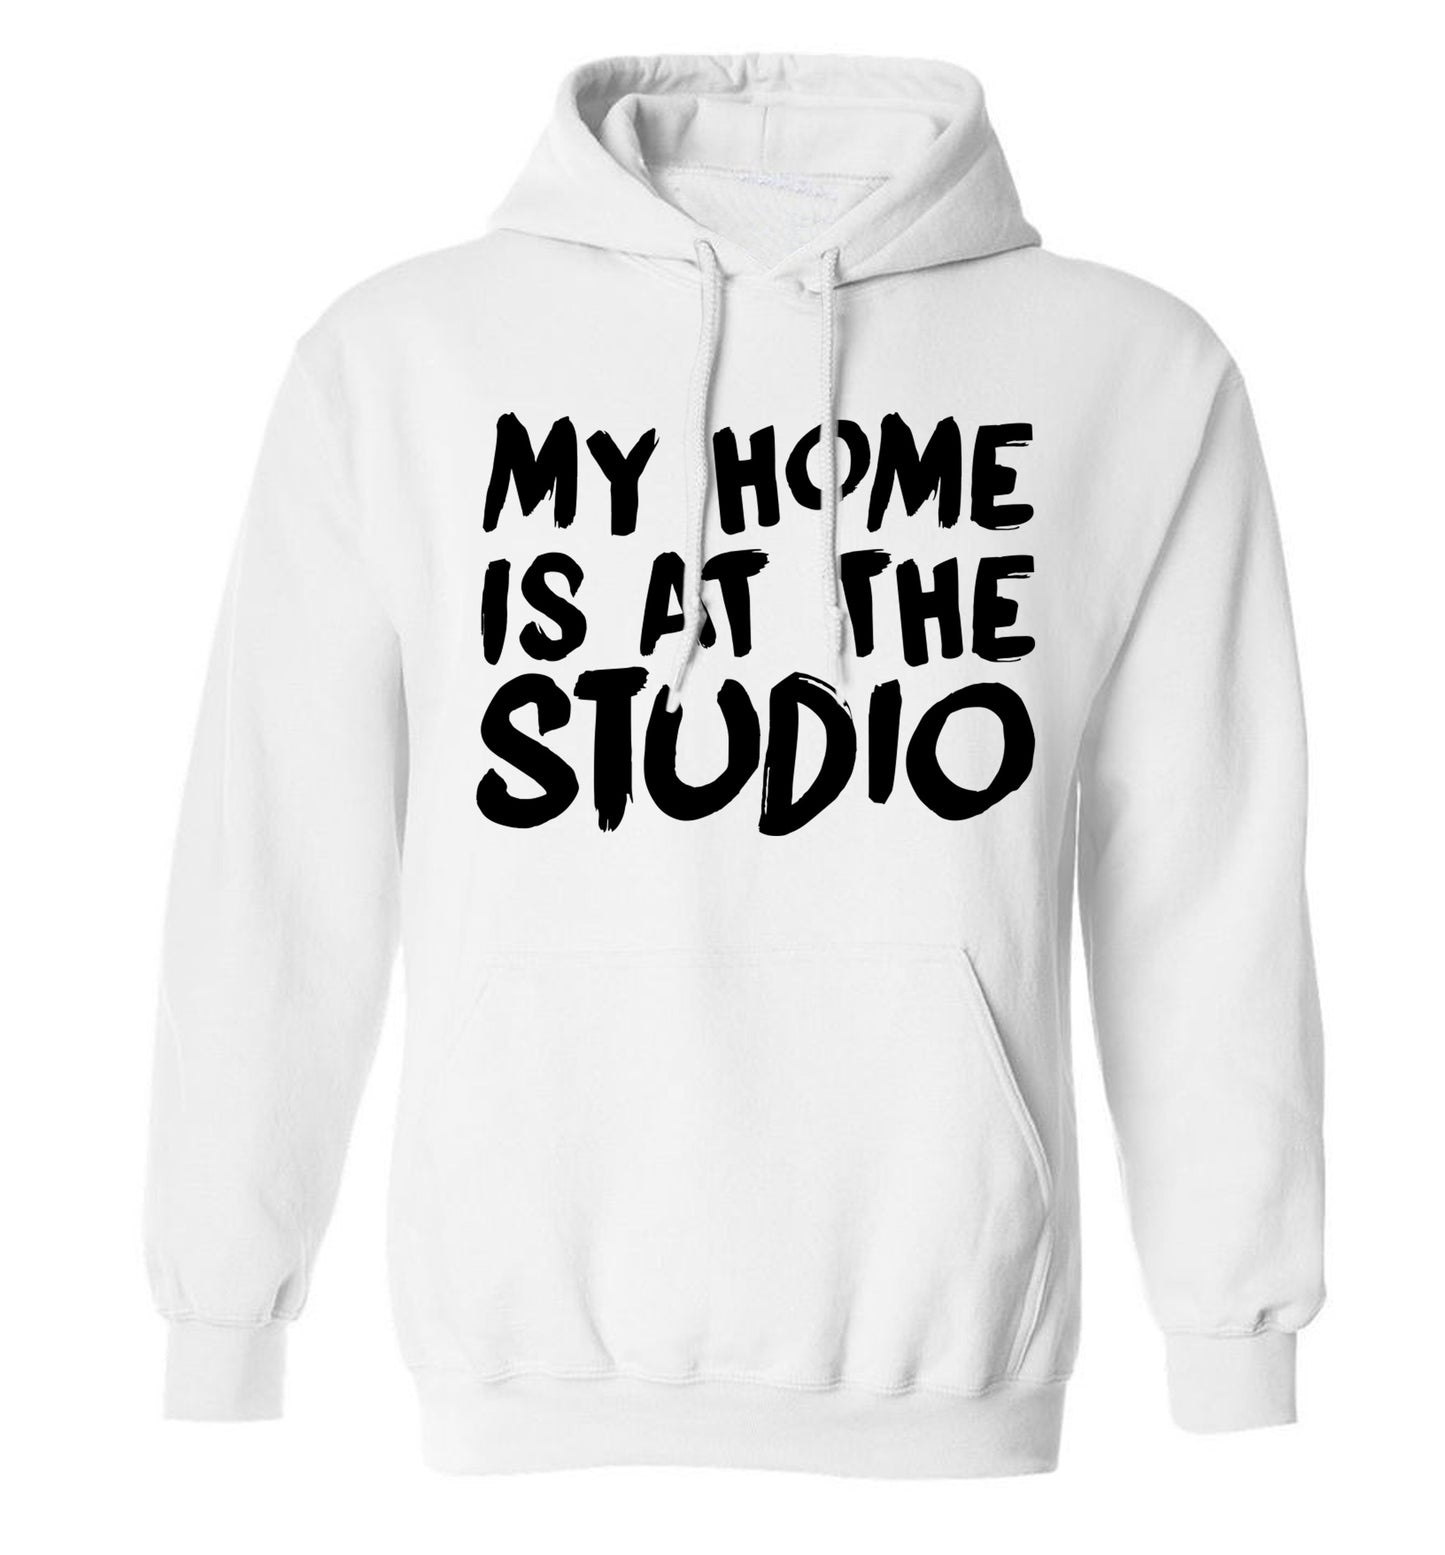 My home is at the studio adults unisex white hoodie 2XL